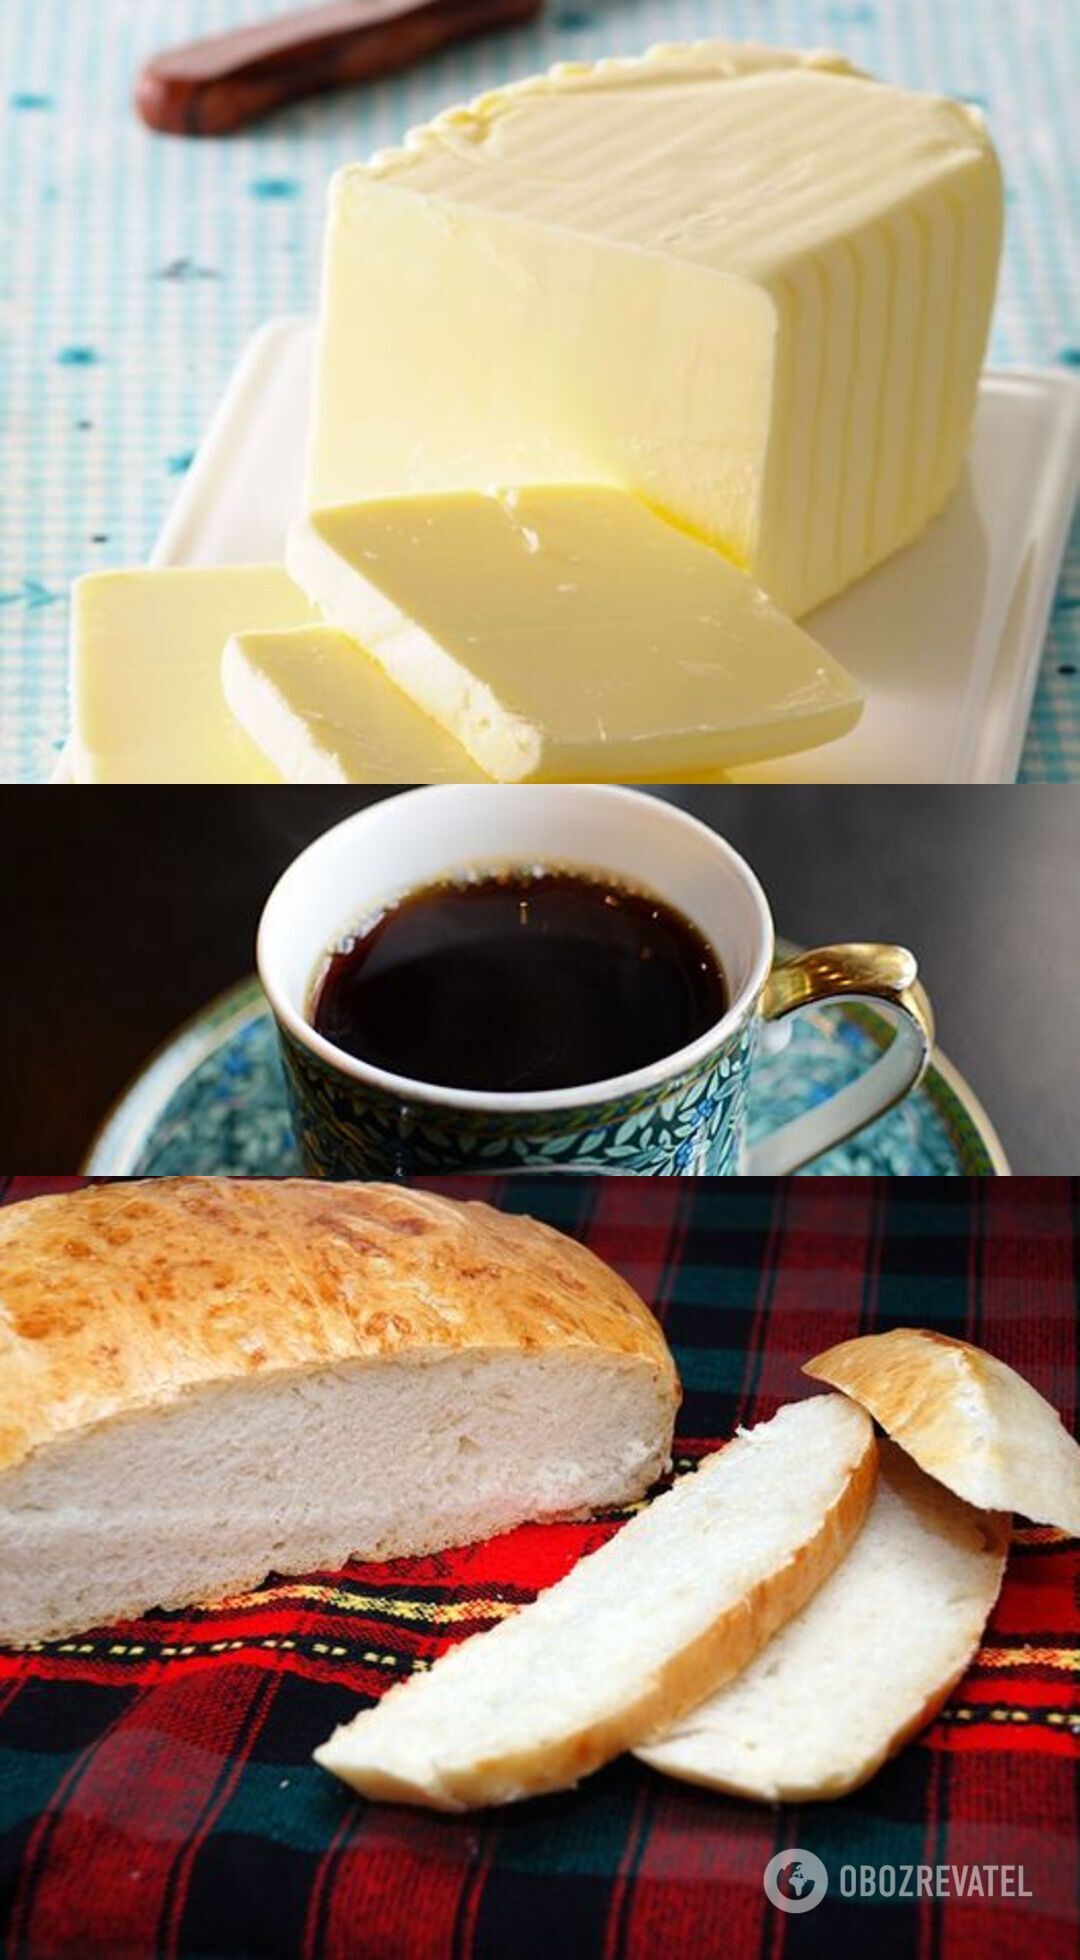 Combination of white bread, butter and tea